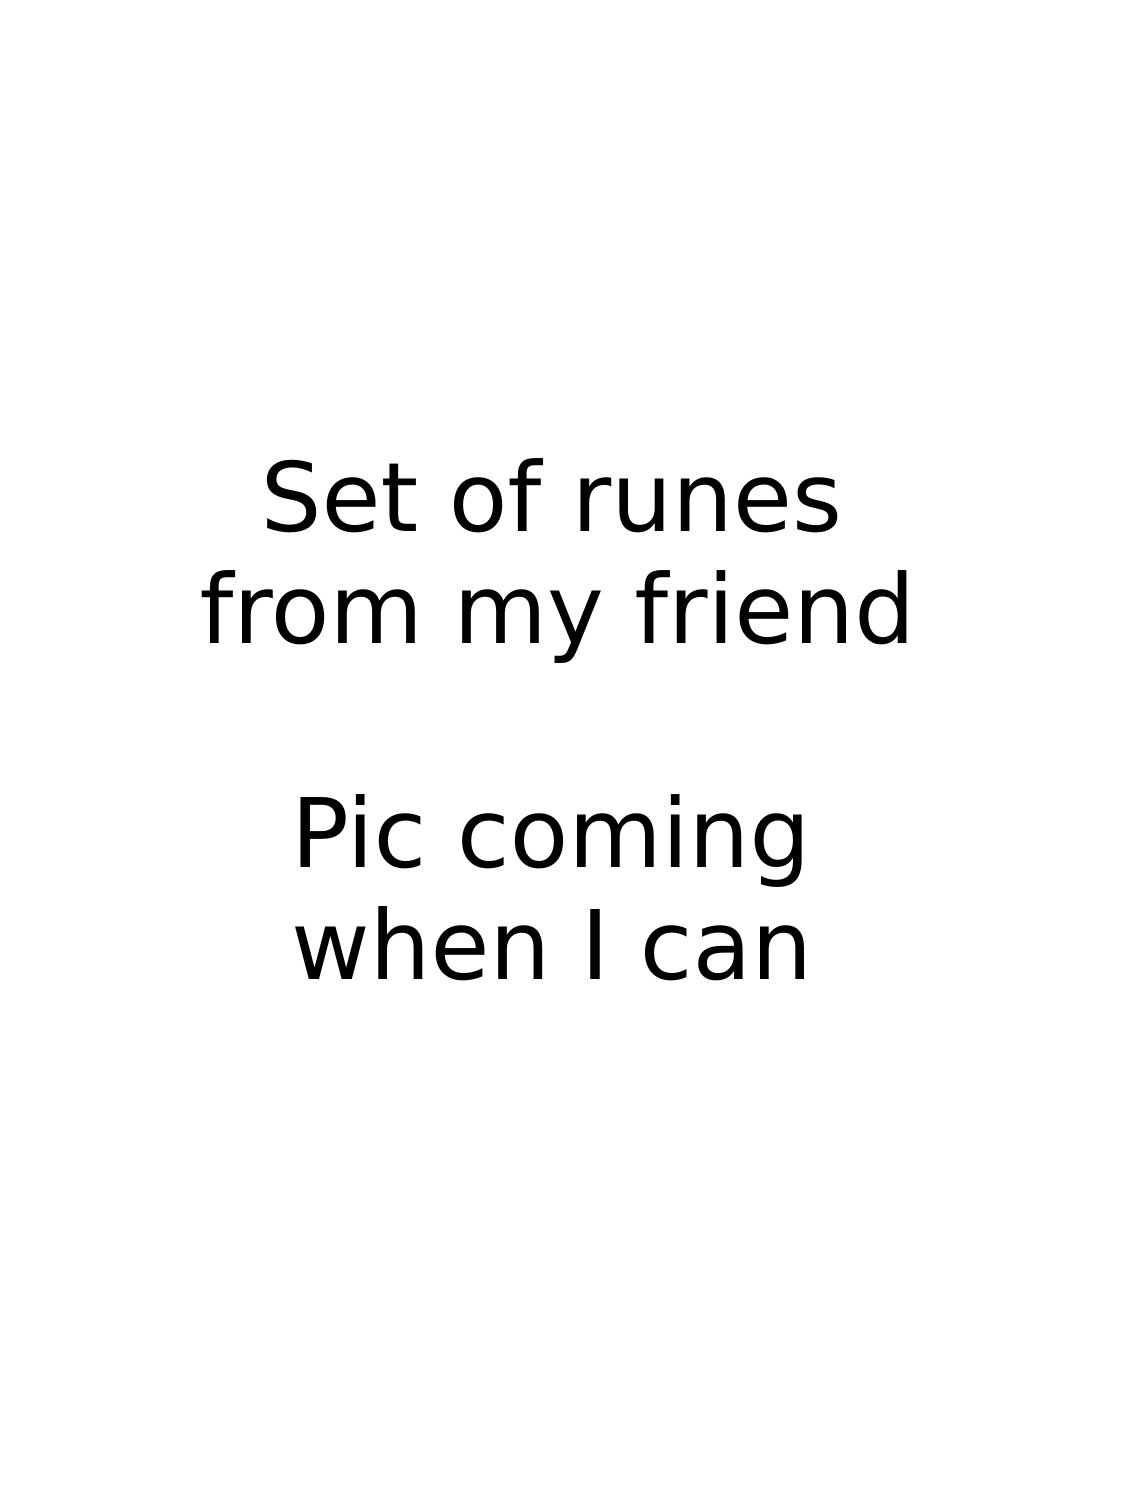 Just text saying set of runes from my friend. Pic coming when I can